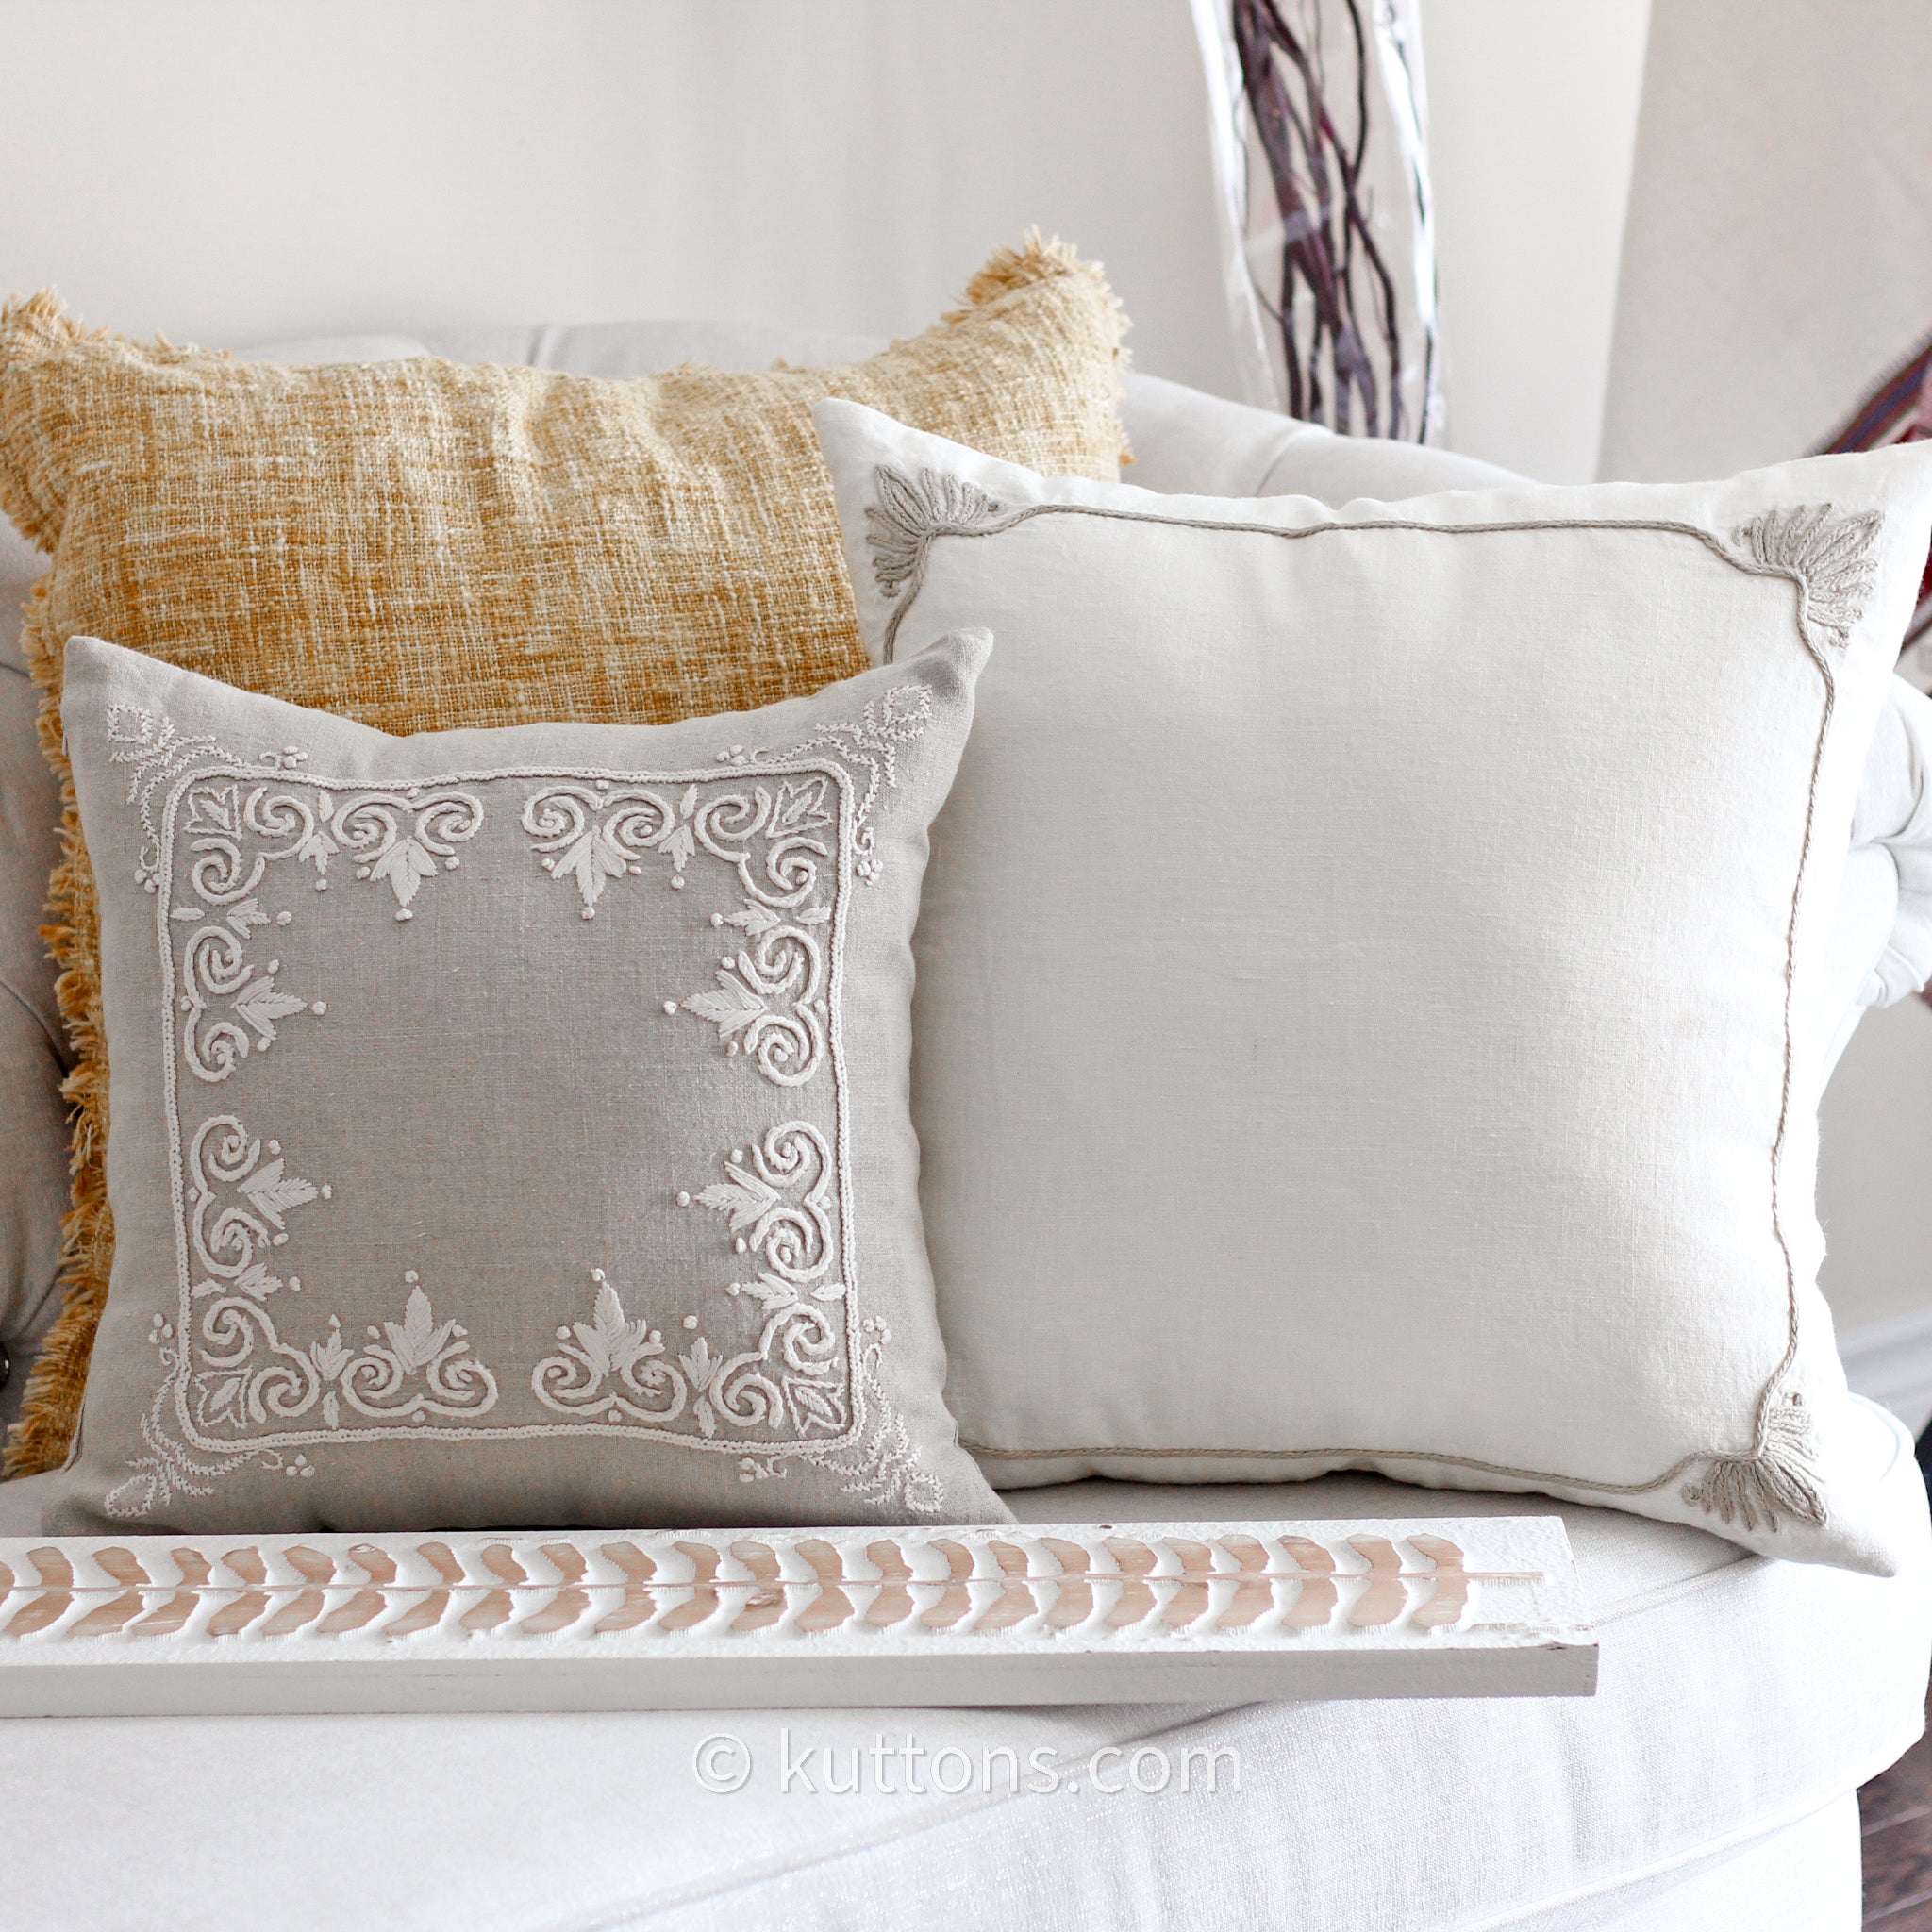 Embroidered 100% Pure Linen Cushion Covers - Decorative Linen Throw Pillow  (Set of 2)